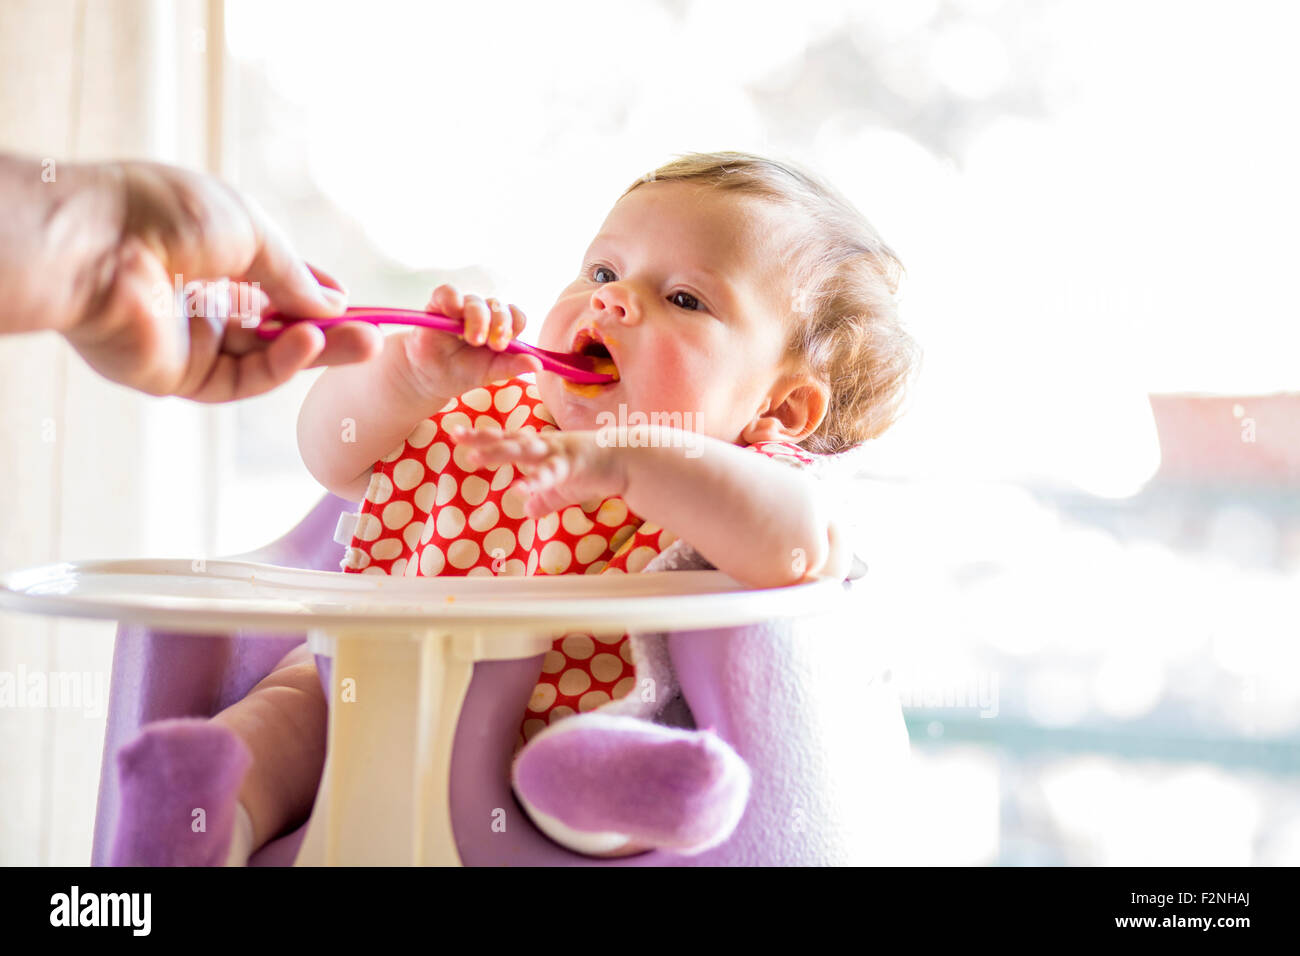 Caucasian baby girl eating from spoon in high chair Stock Photo